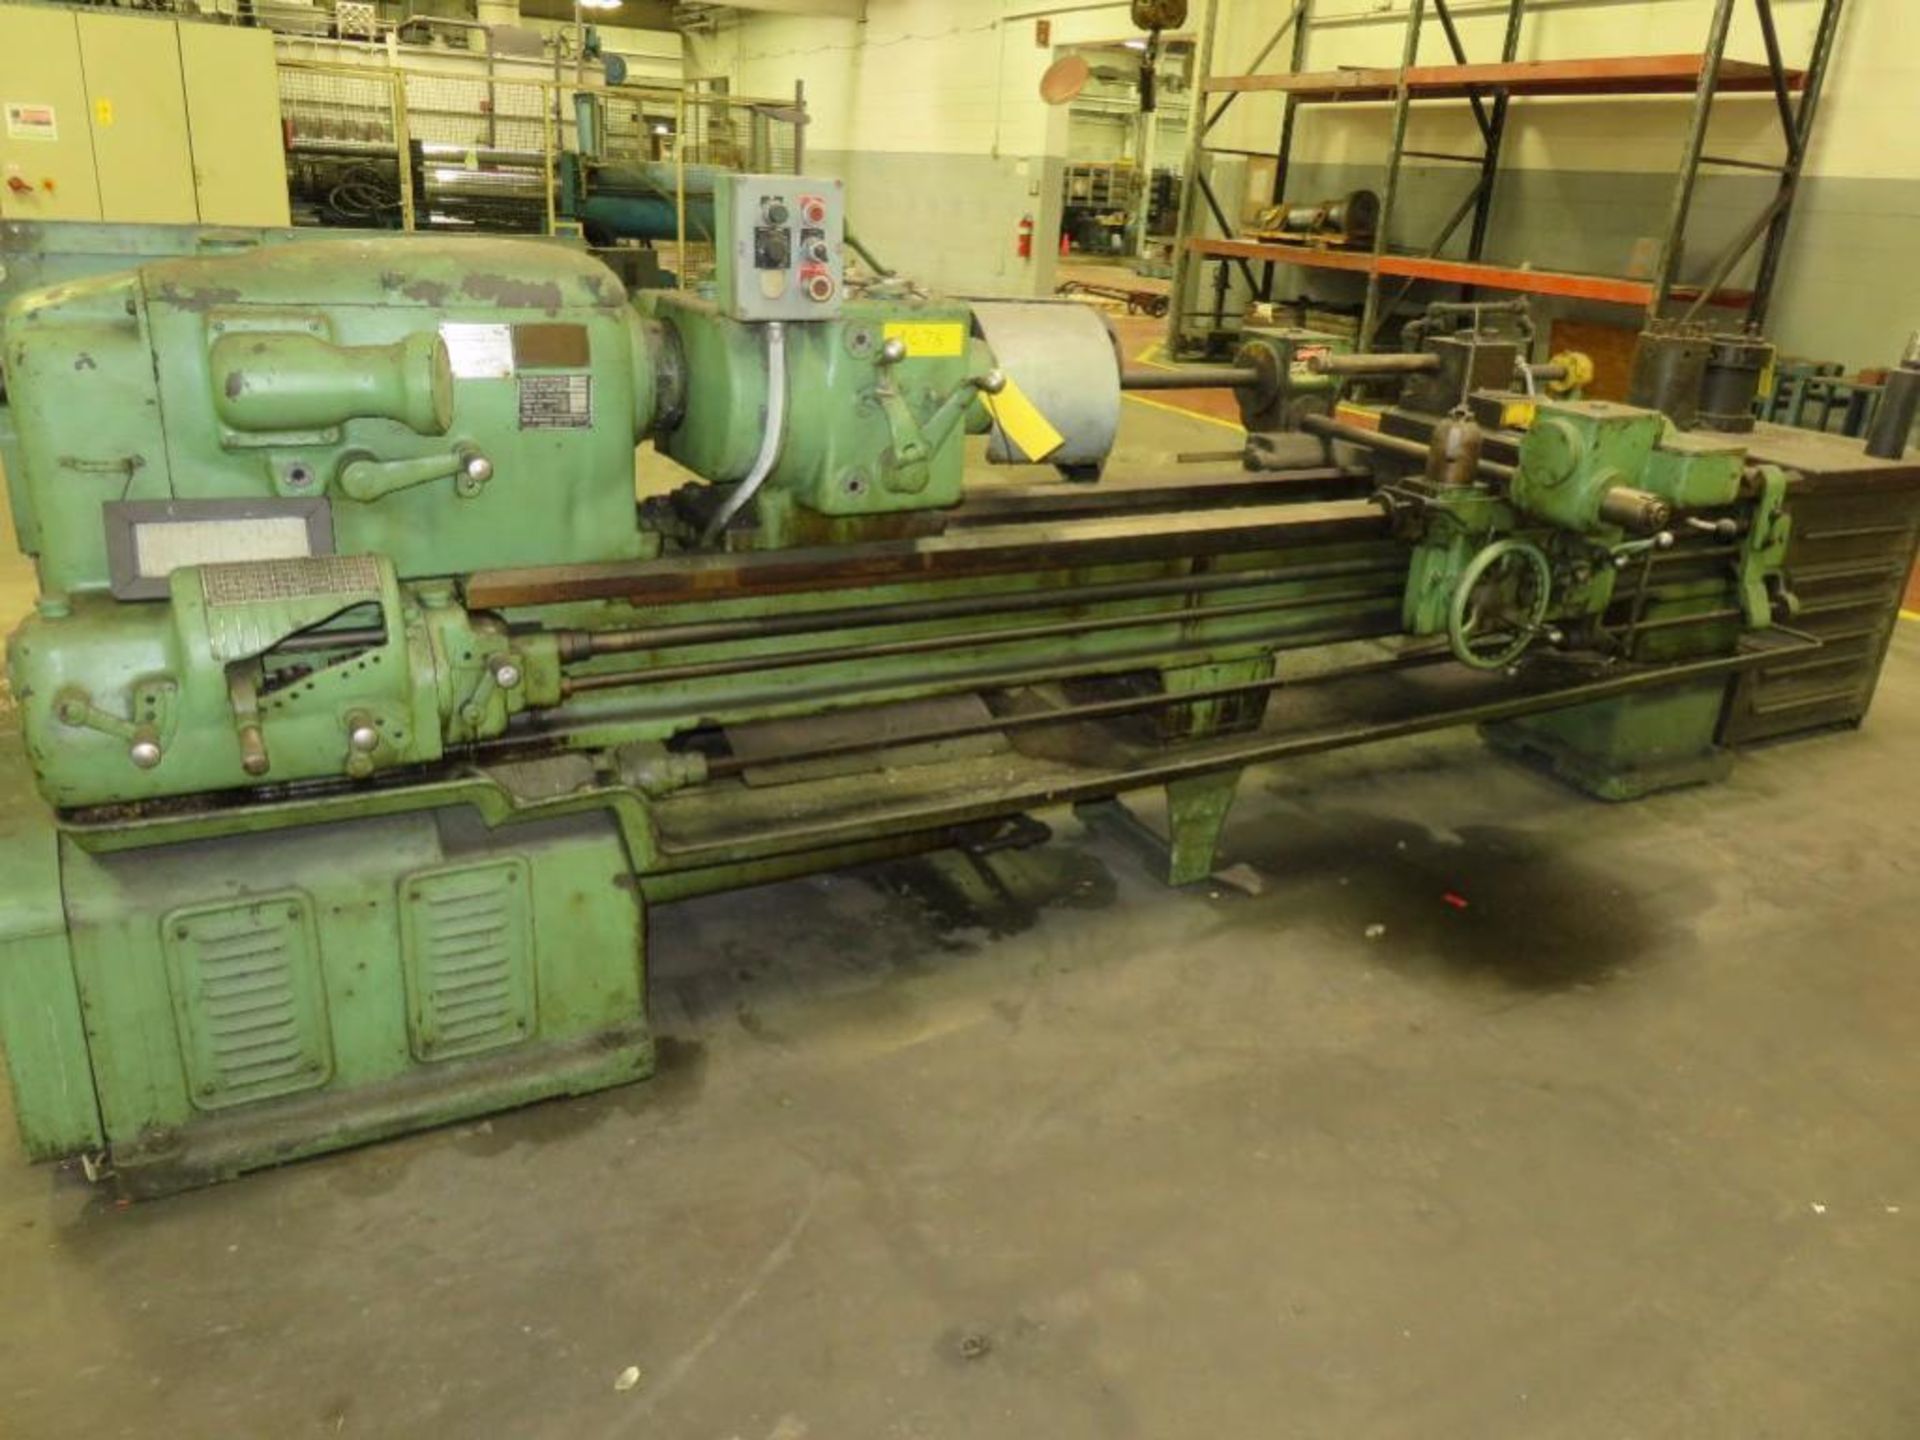 LOT: Monarch 18 in. x 96 in. Geared Head Engine Lathe Model 18BB, S/N 25067, with Boring, Carriage,